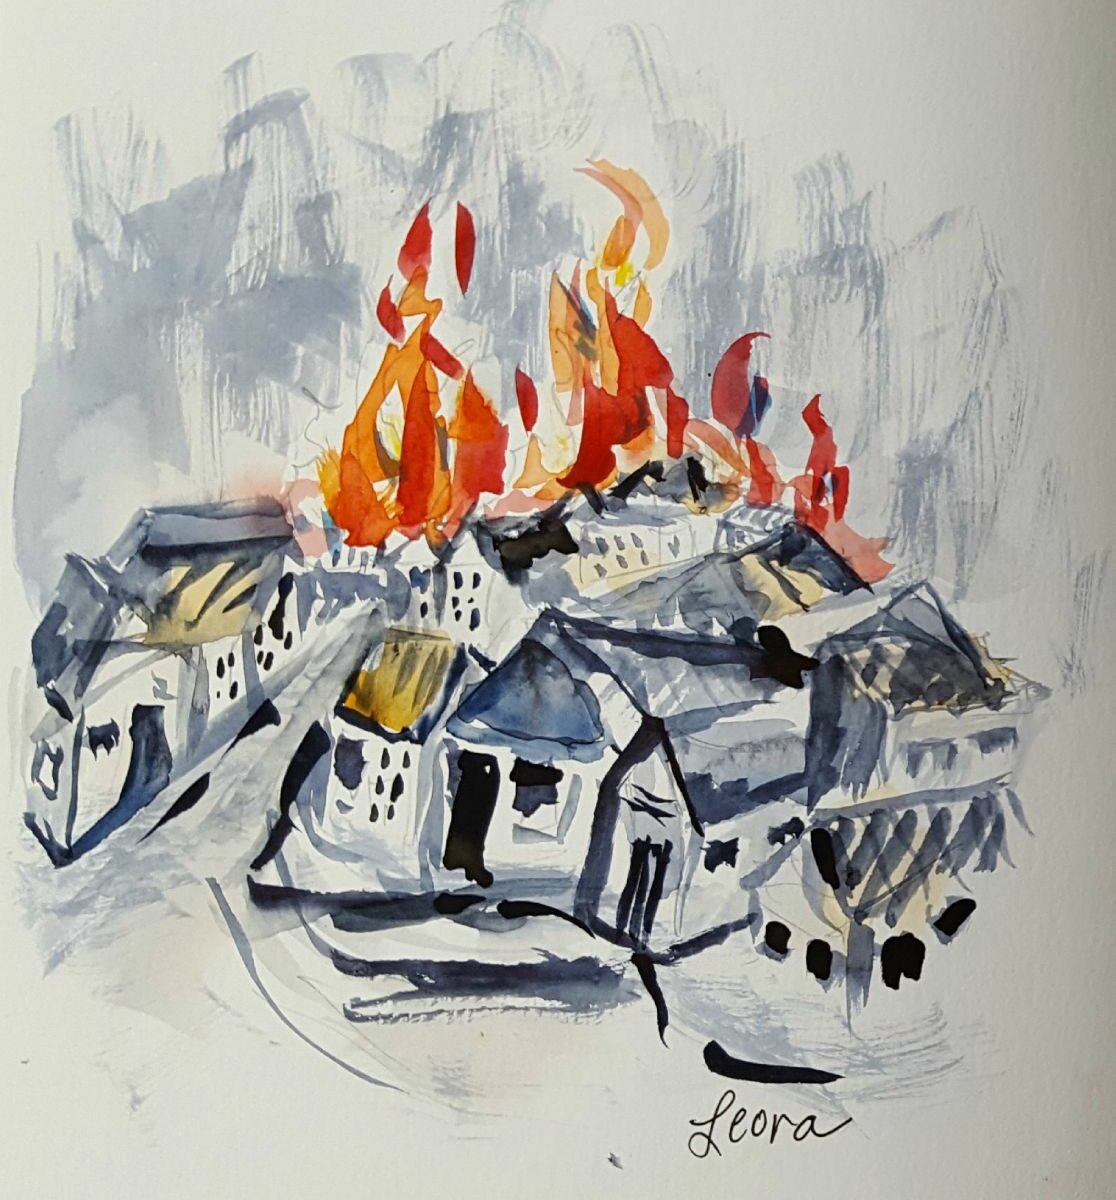 A Fire is Burning: watercolor by Leora Wenger based on a poem by Mordechai Gebirtig